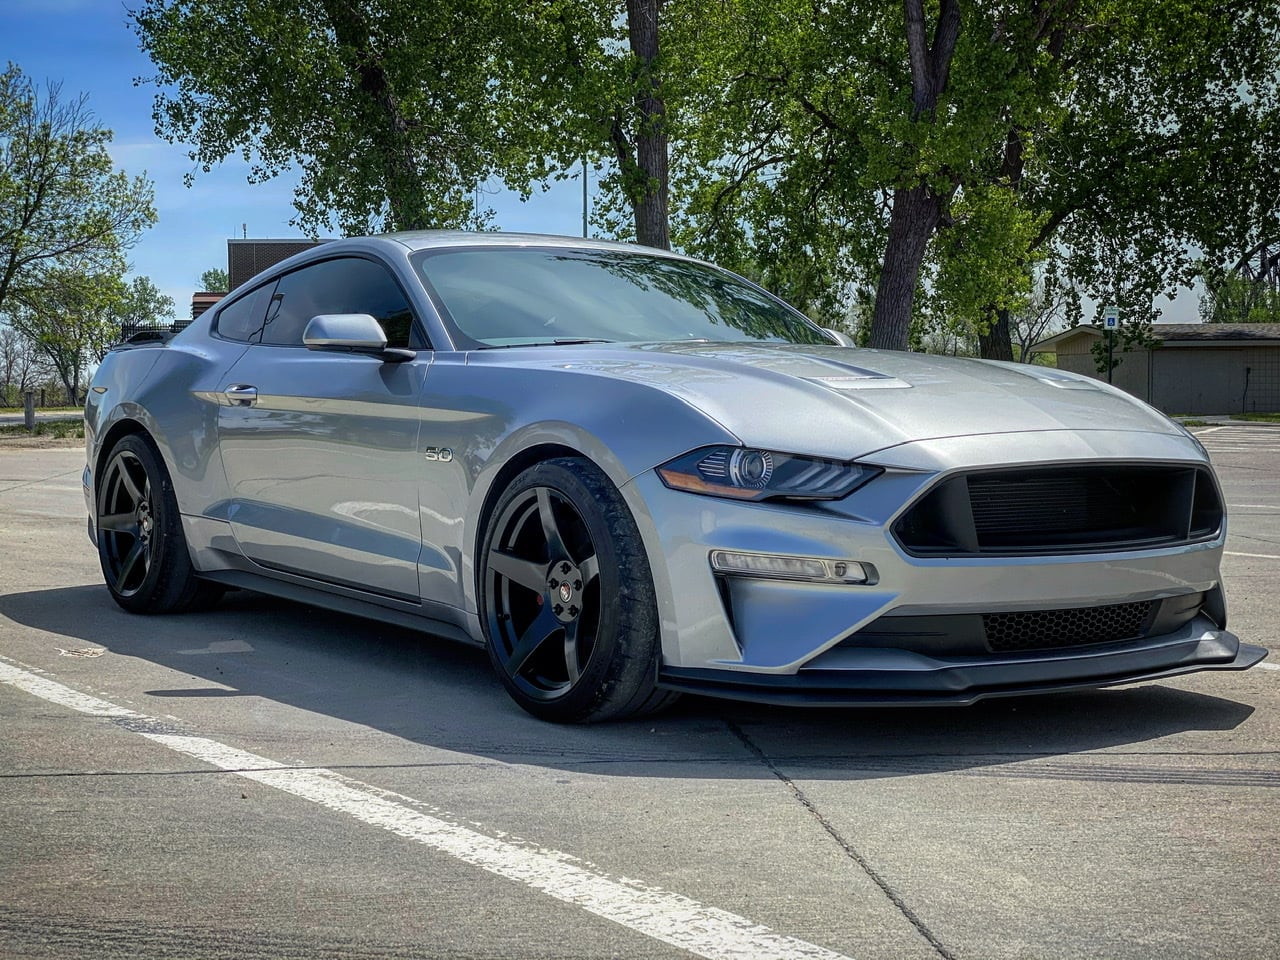 Ford Mustang GT S550 Silver Project 6GR FIVE | Wheel Front